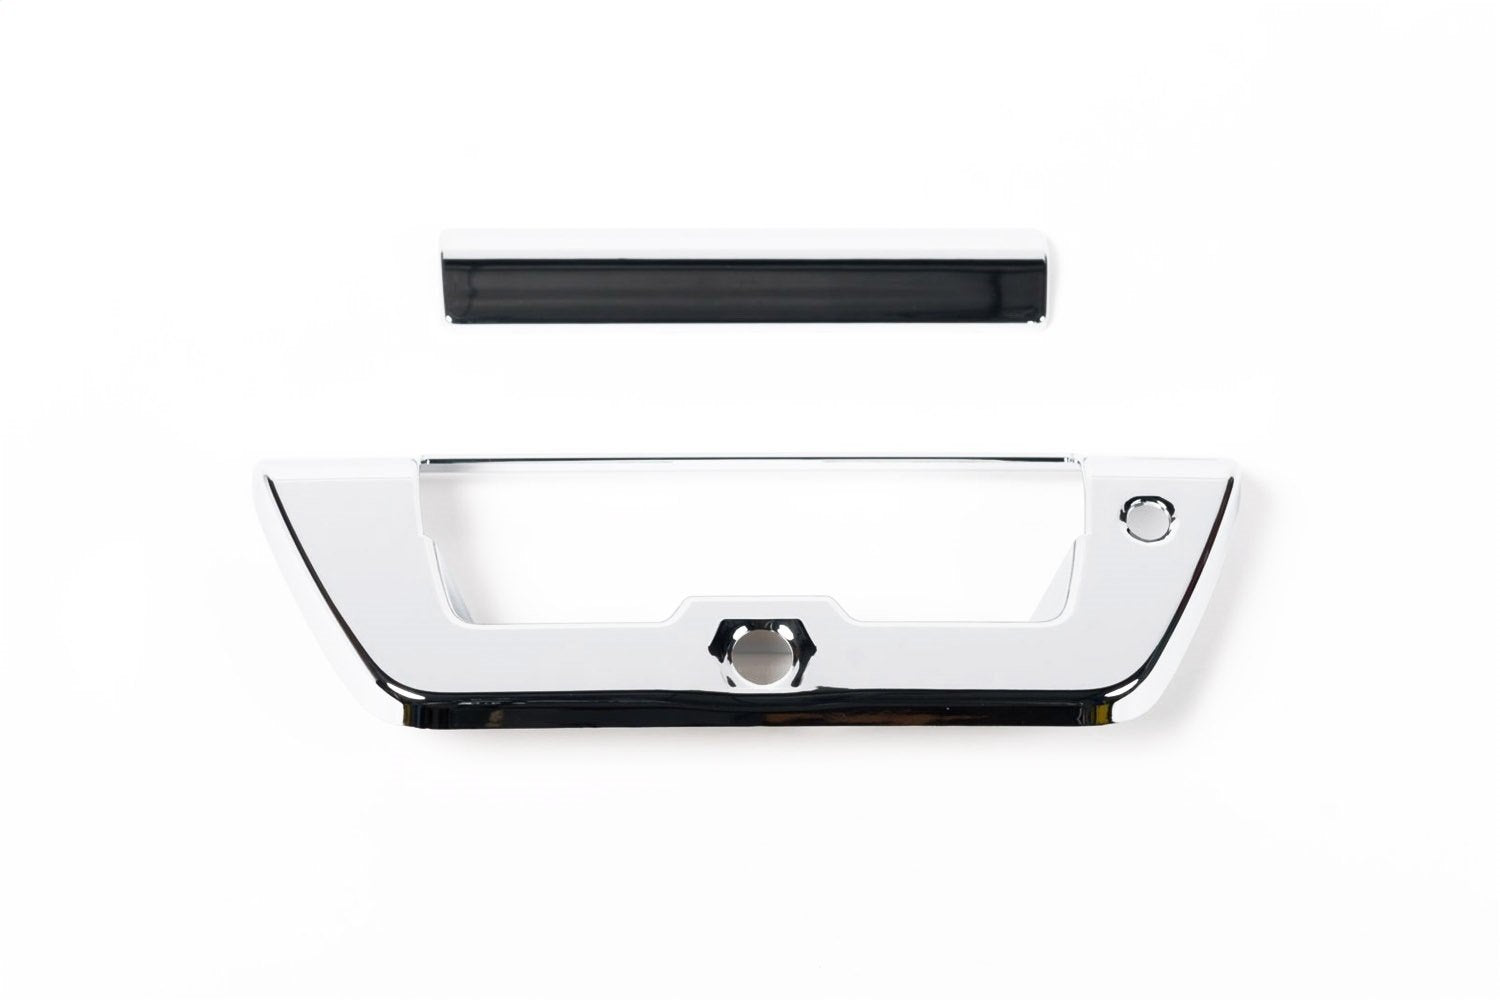 Putco 401075 Tailgate Handle Cover For Ford F-150, Chrome